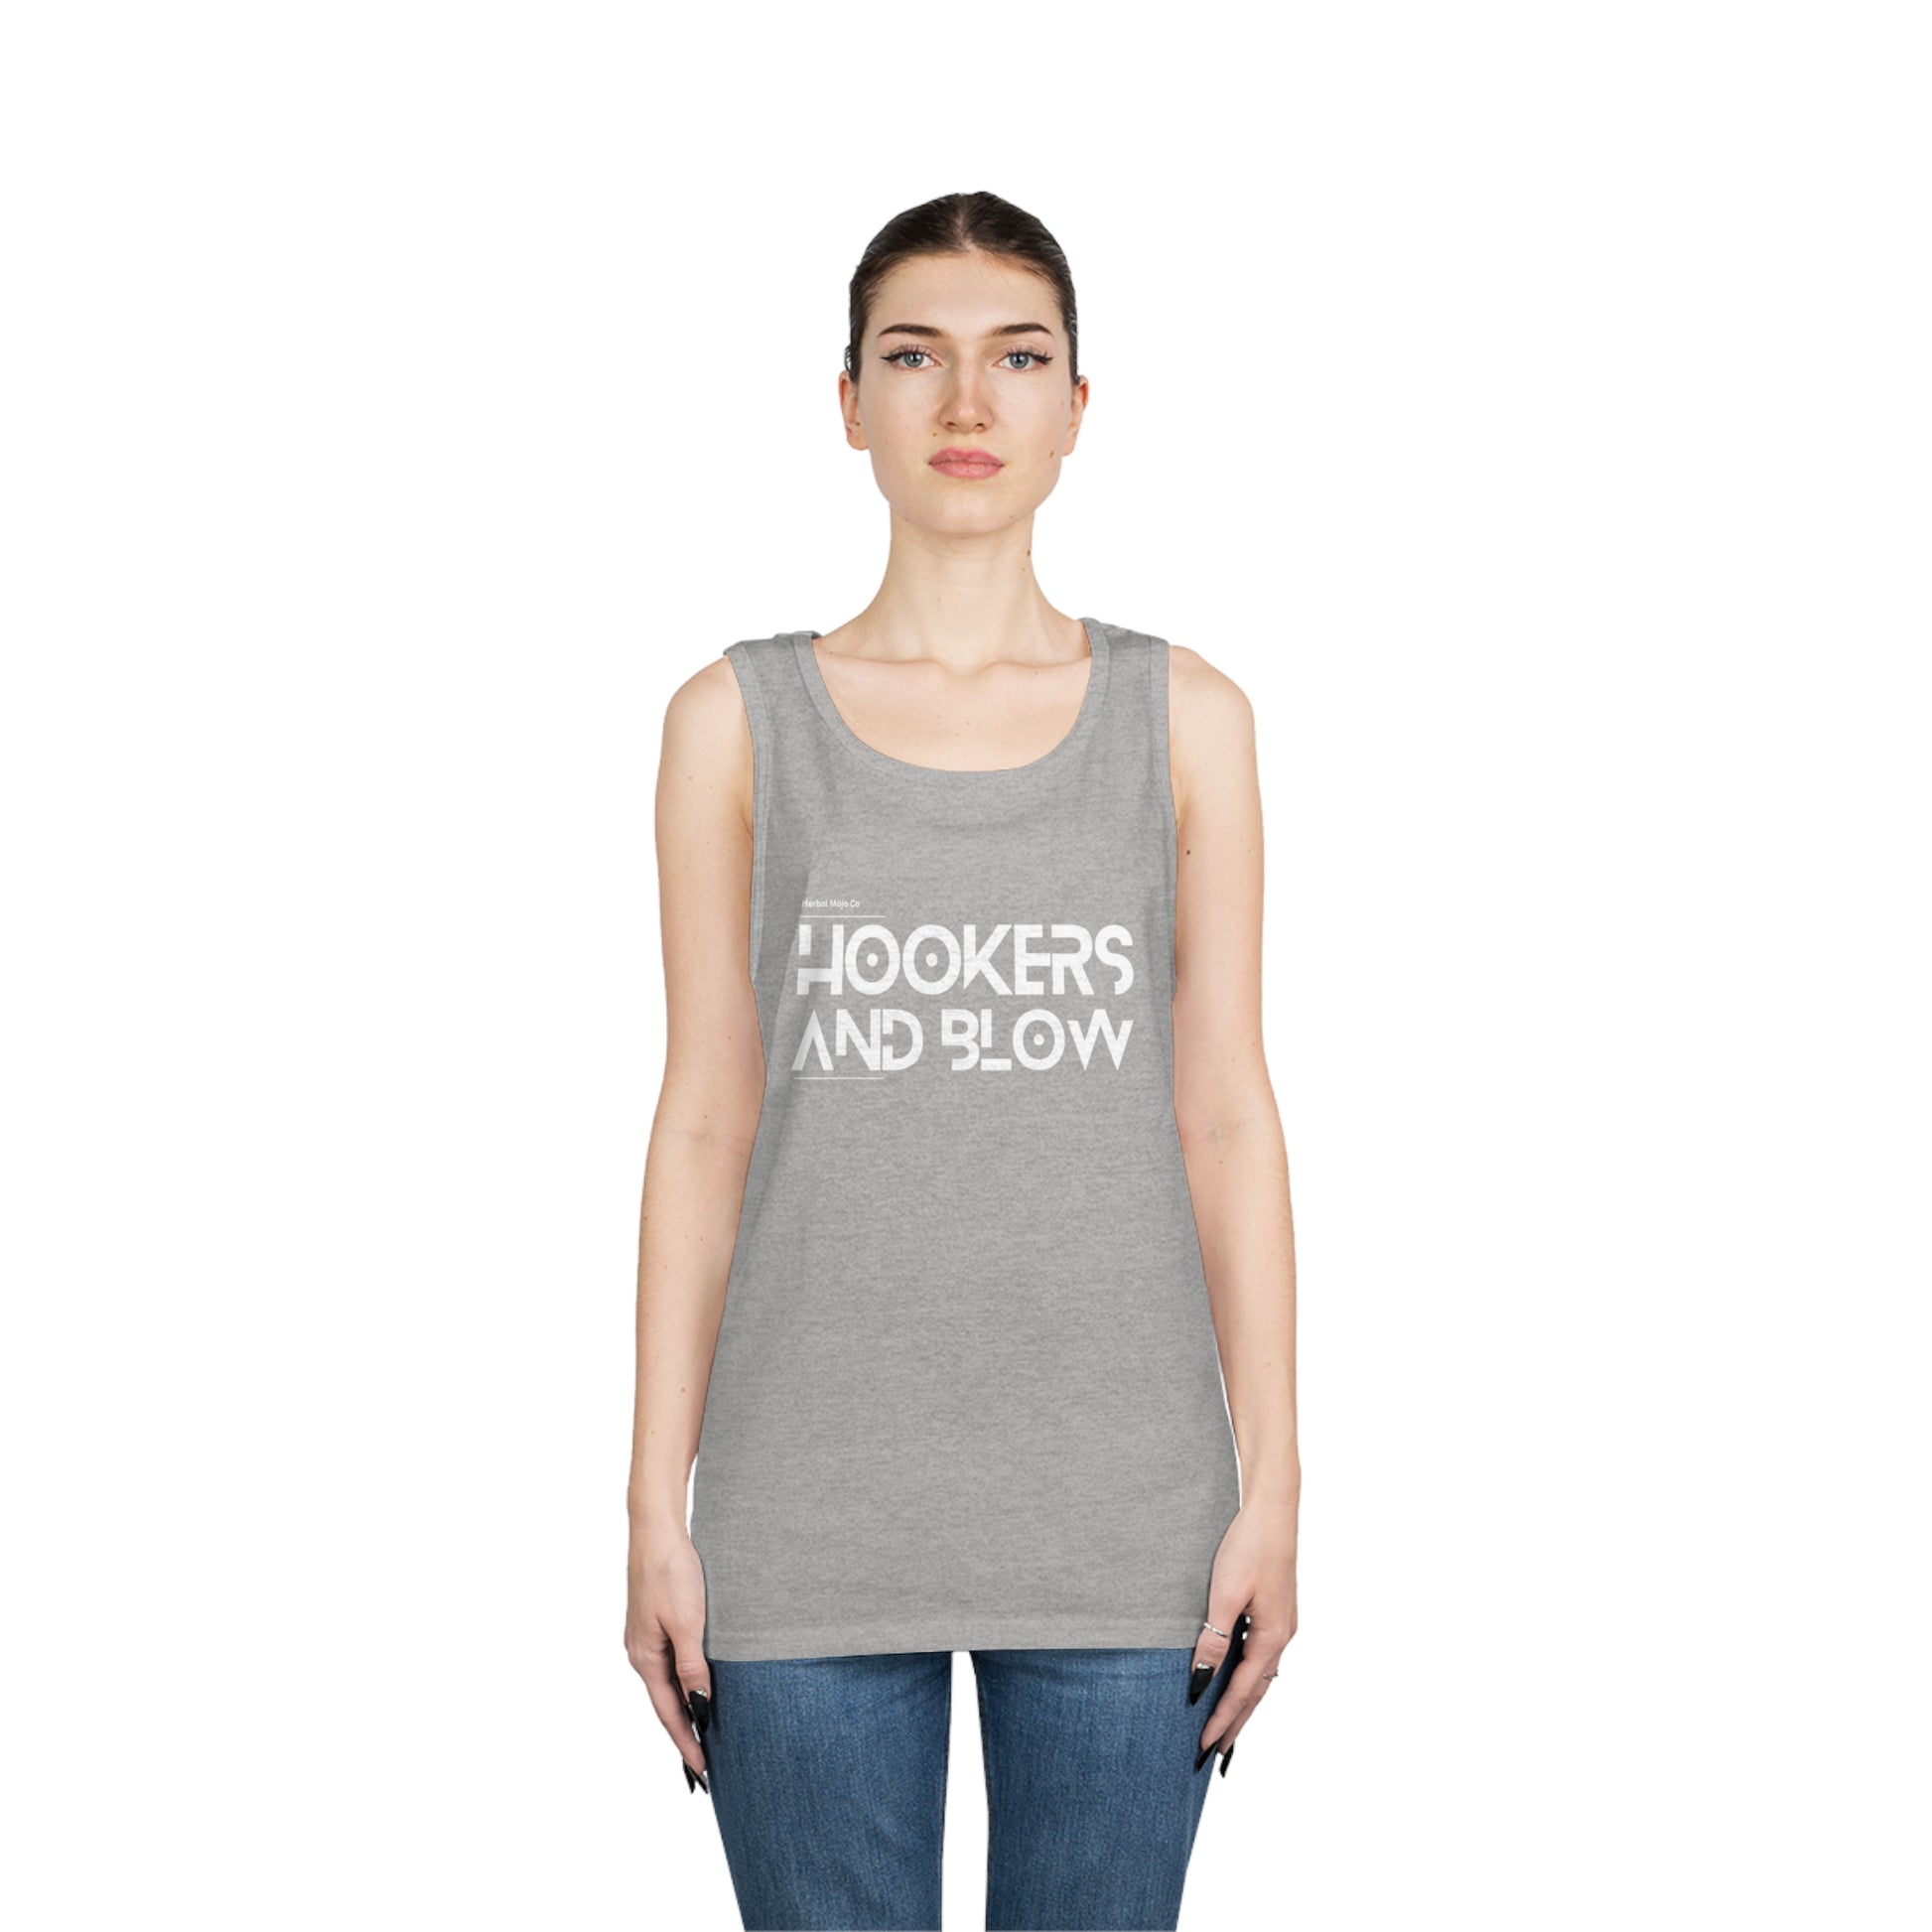 Juucie's Unisex Cotton Hookers and Blow Tank Top - Juucie